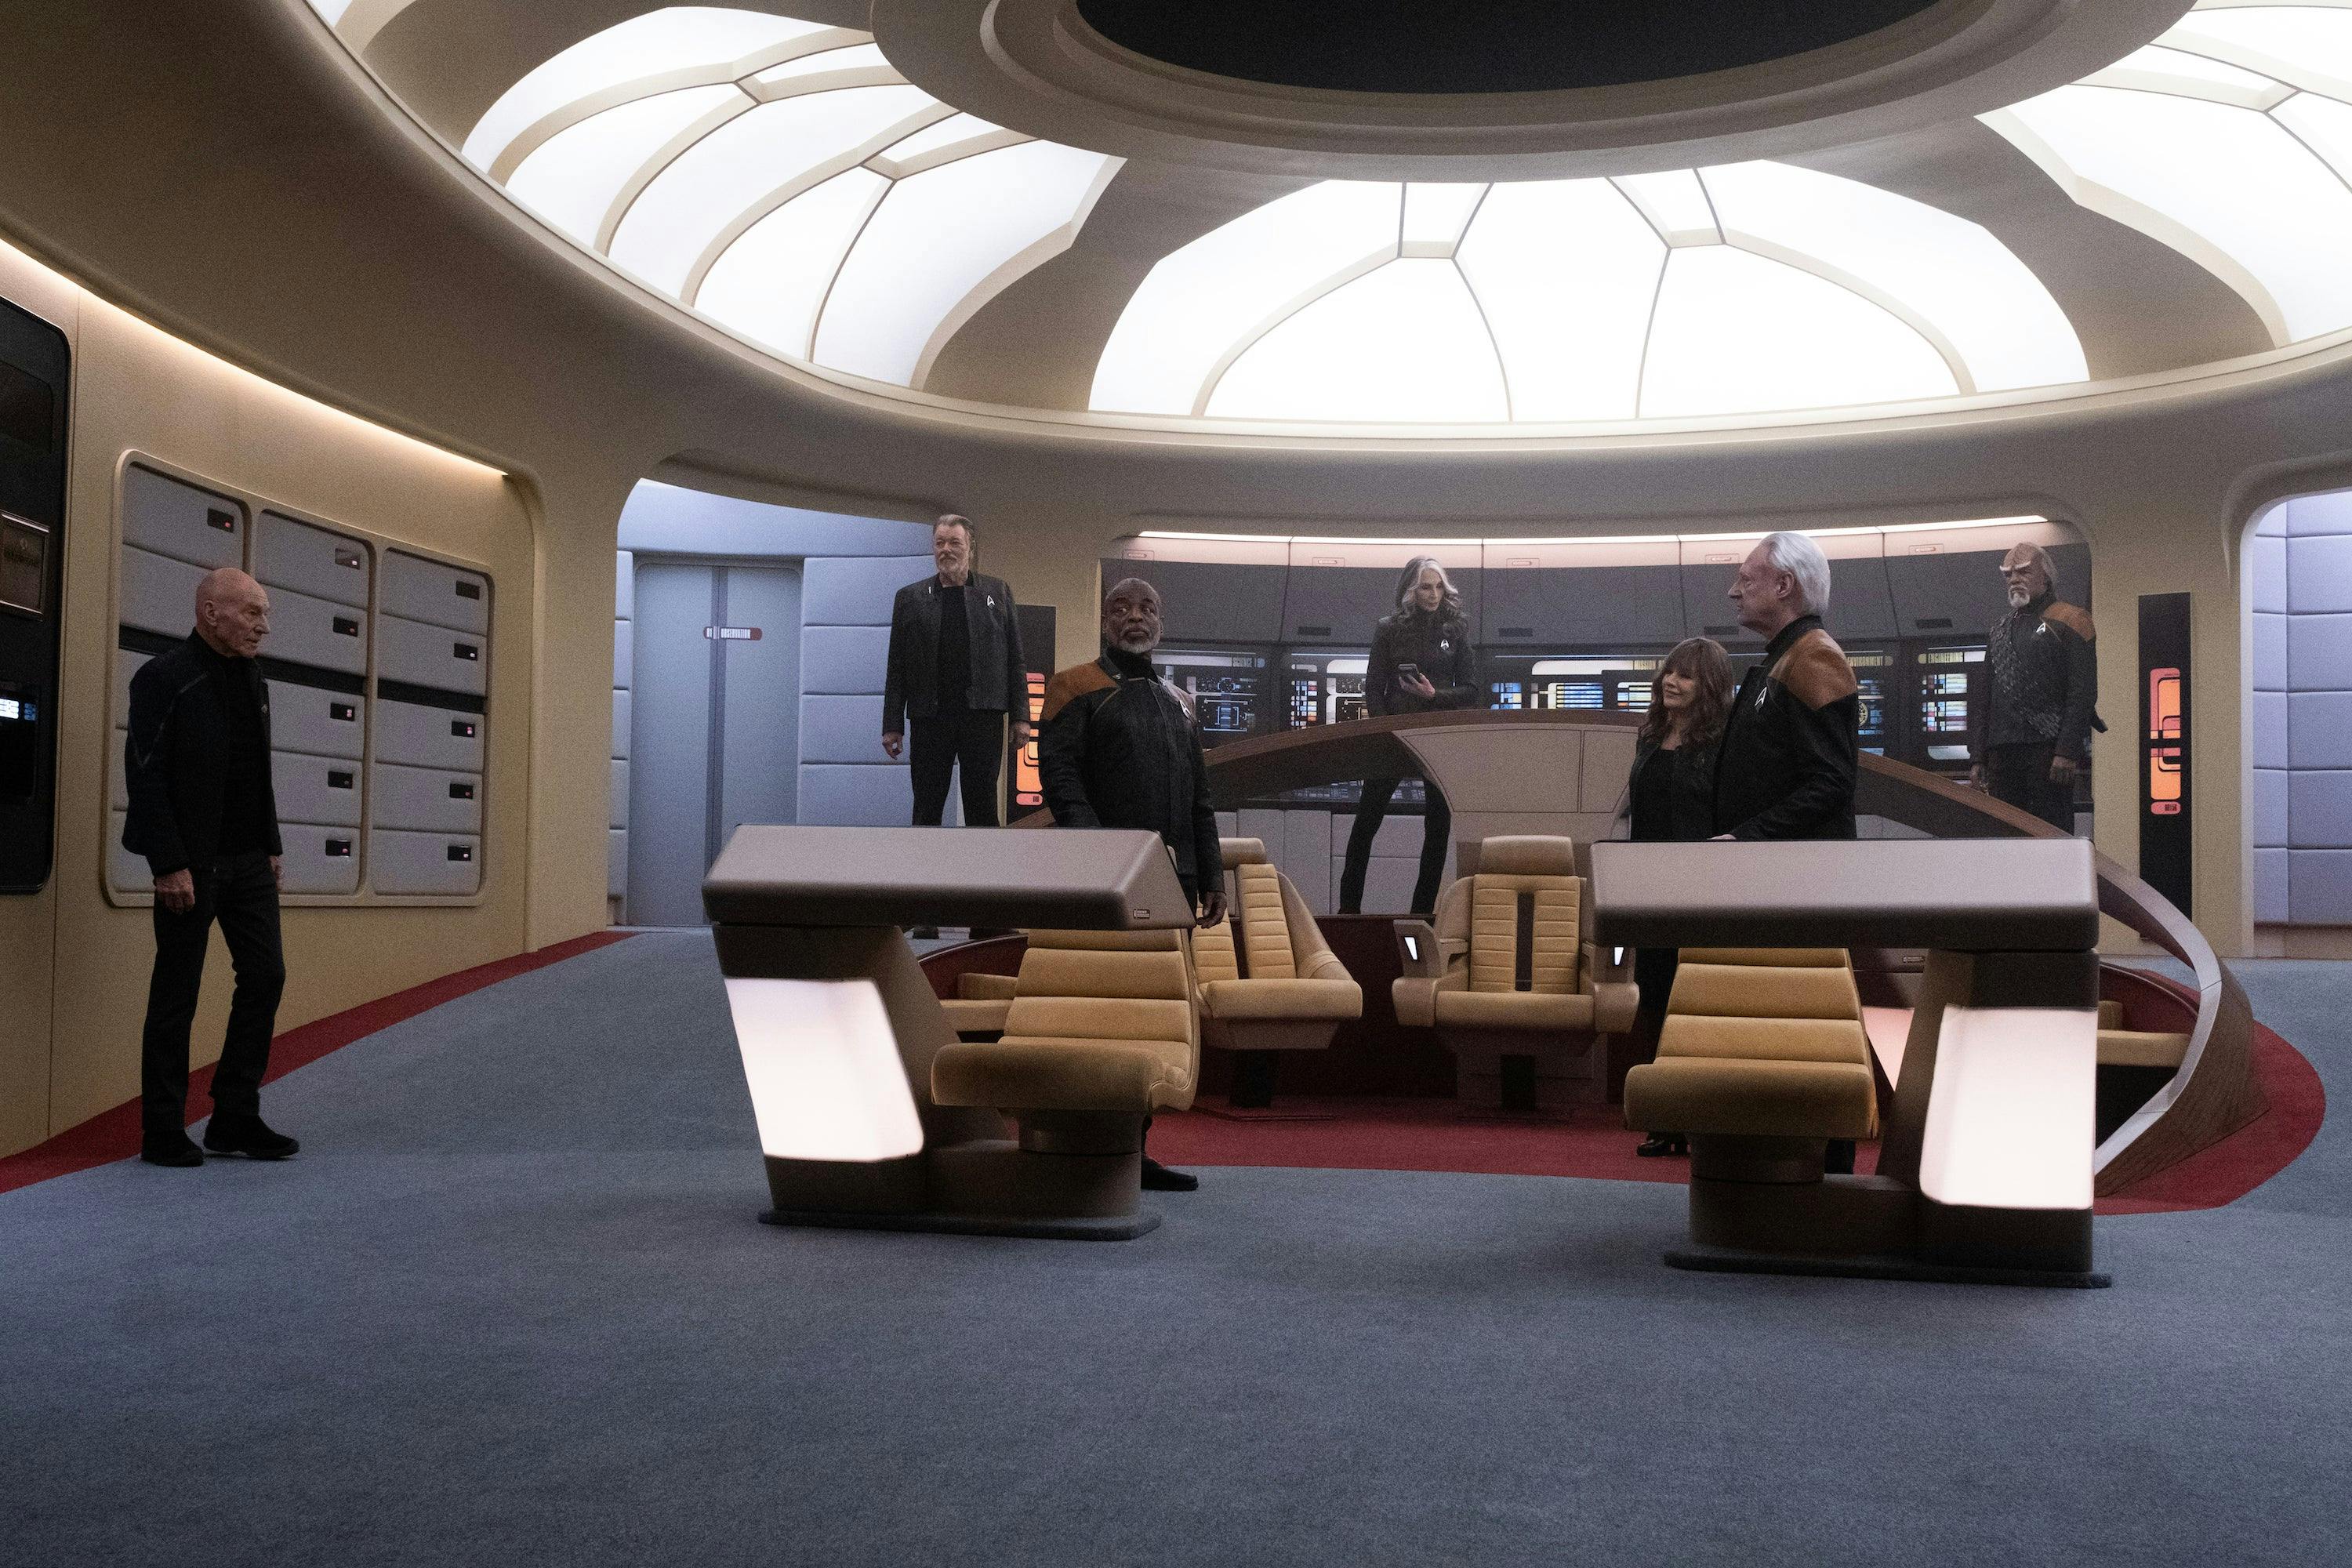 Riker, Geordi, Beverly, Picard, Deanna, Worf, and Data stand on the Bridge of the reconstructed Enterprise-D in 'Vox'